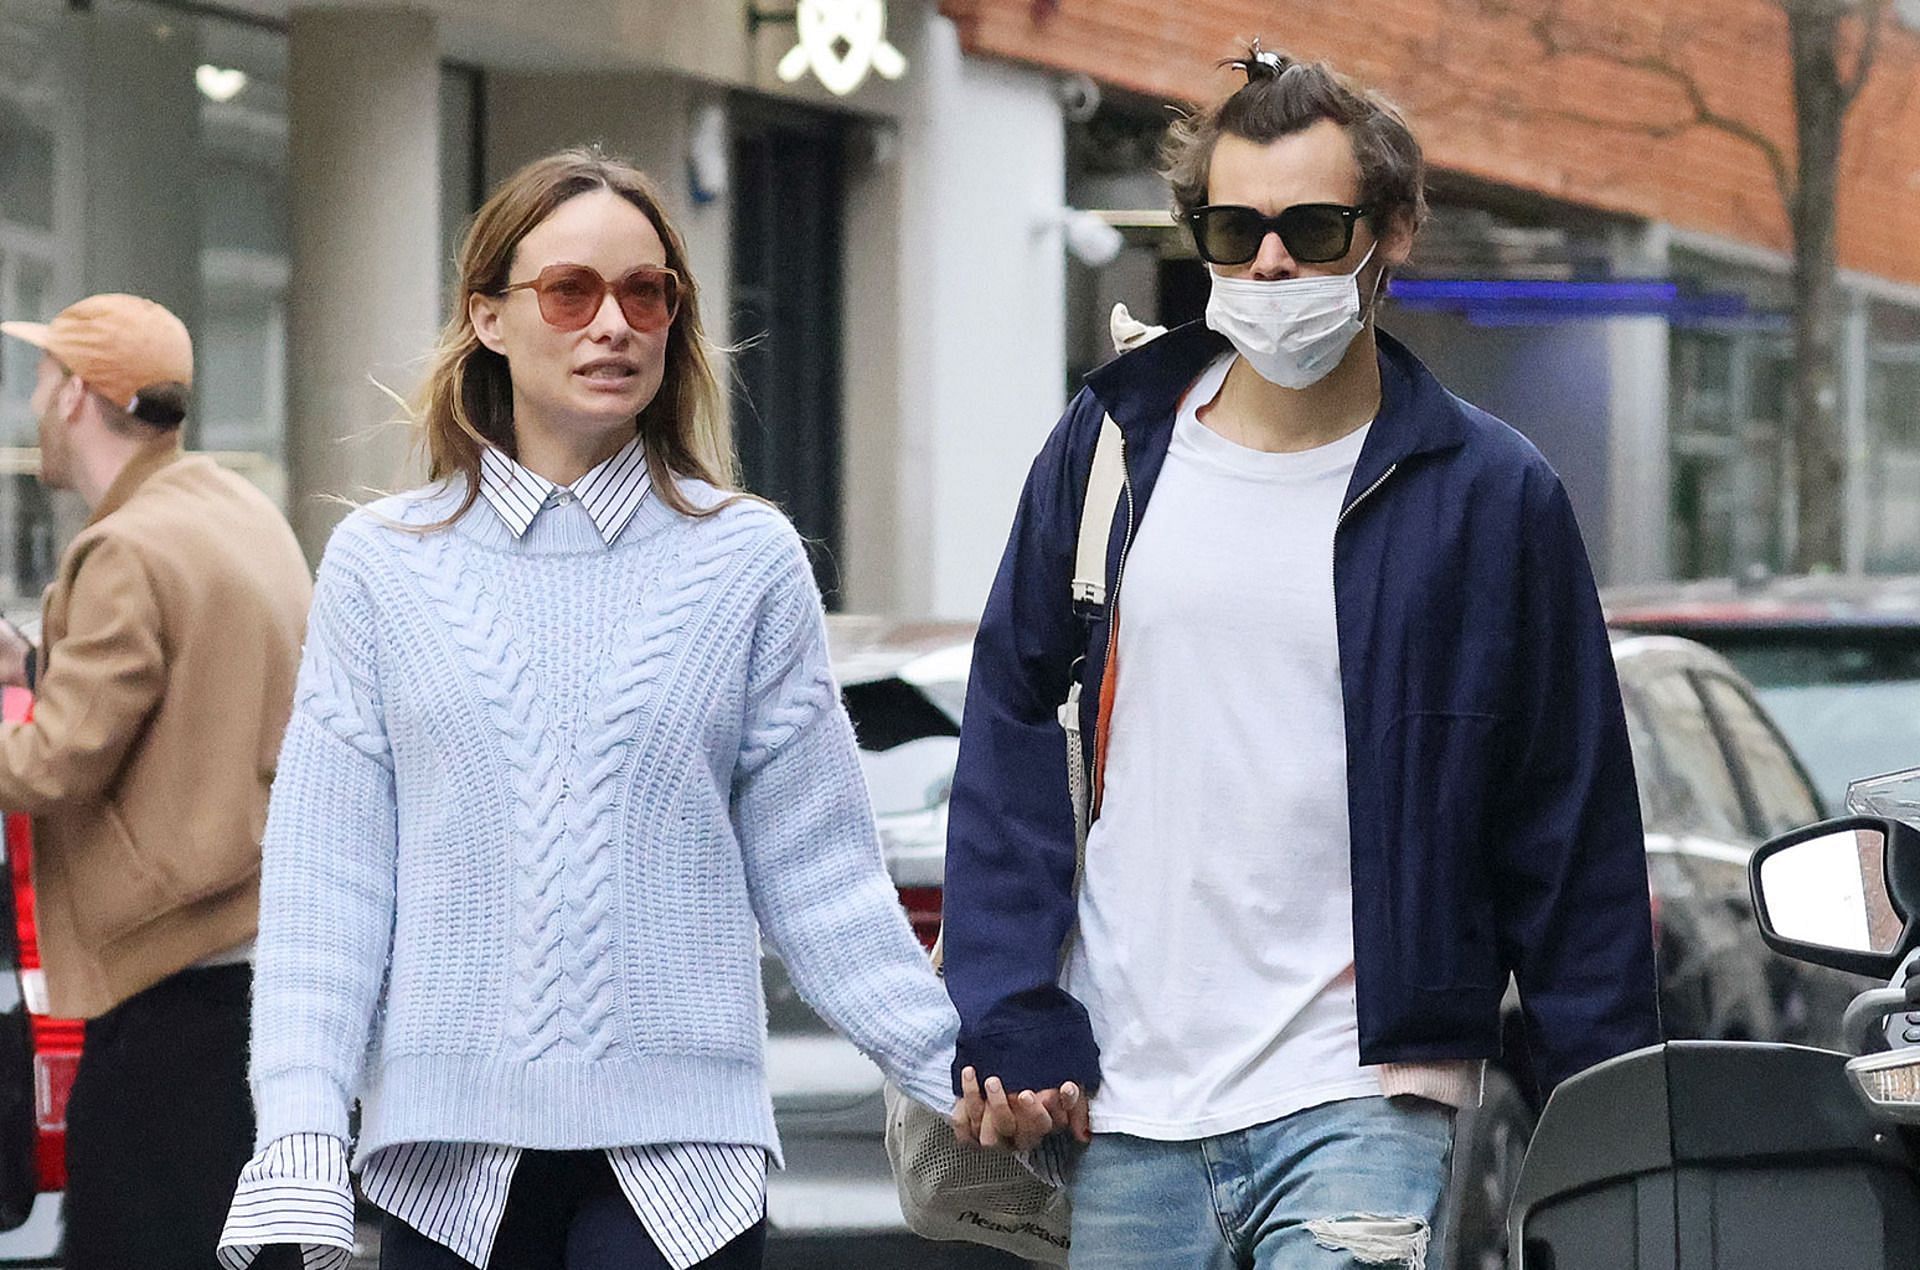 Harry Styles and Olivia Wilde are reportedly &quot;taking a break&quot; (Image via GC Images)